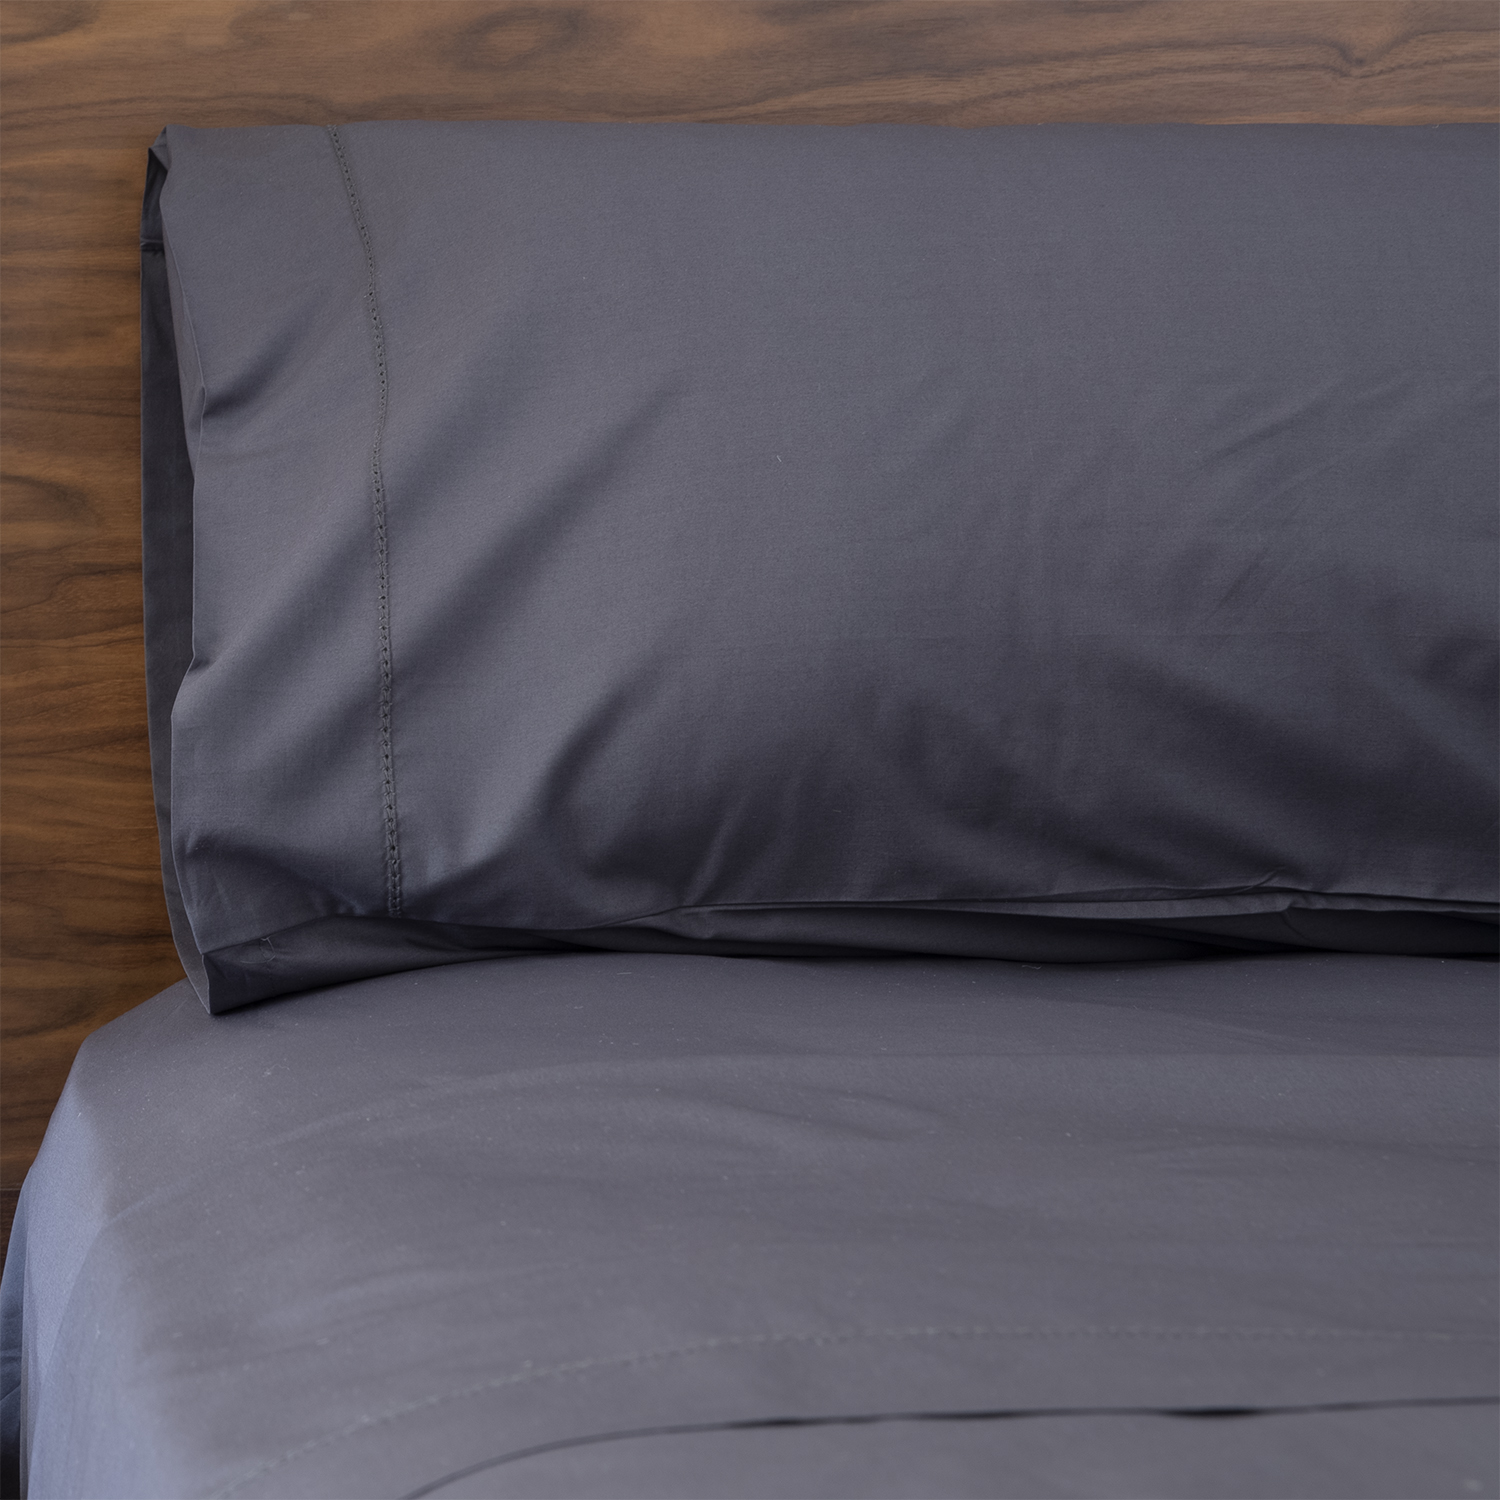 Charcoal Grey Cotton Percale Fitted Sheet